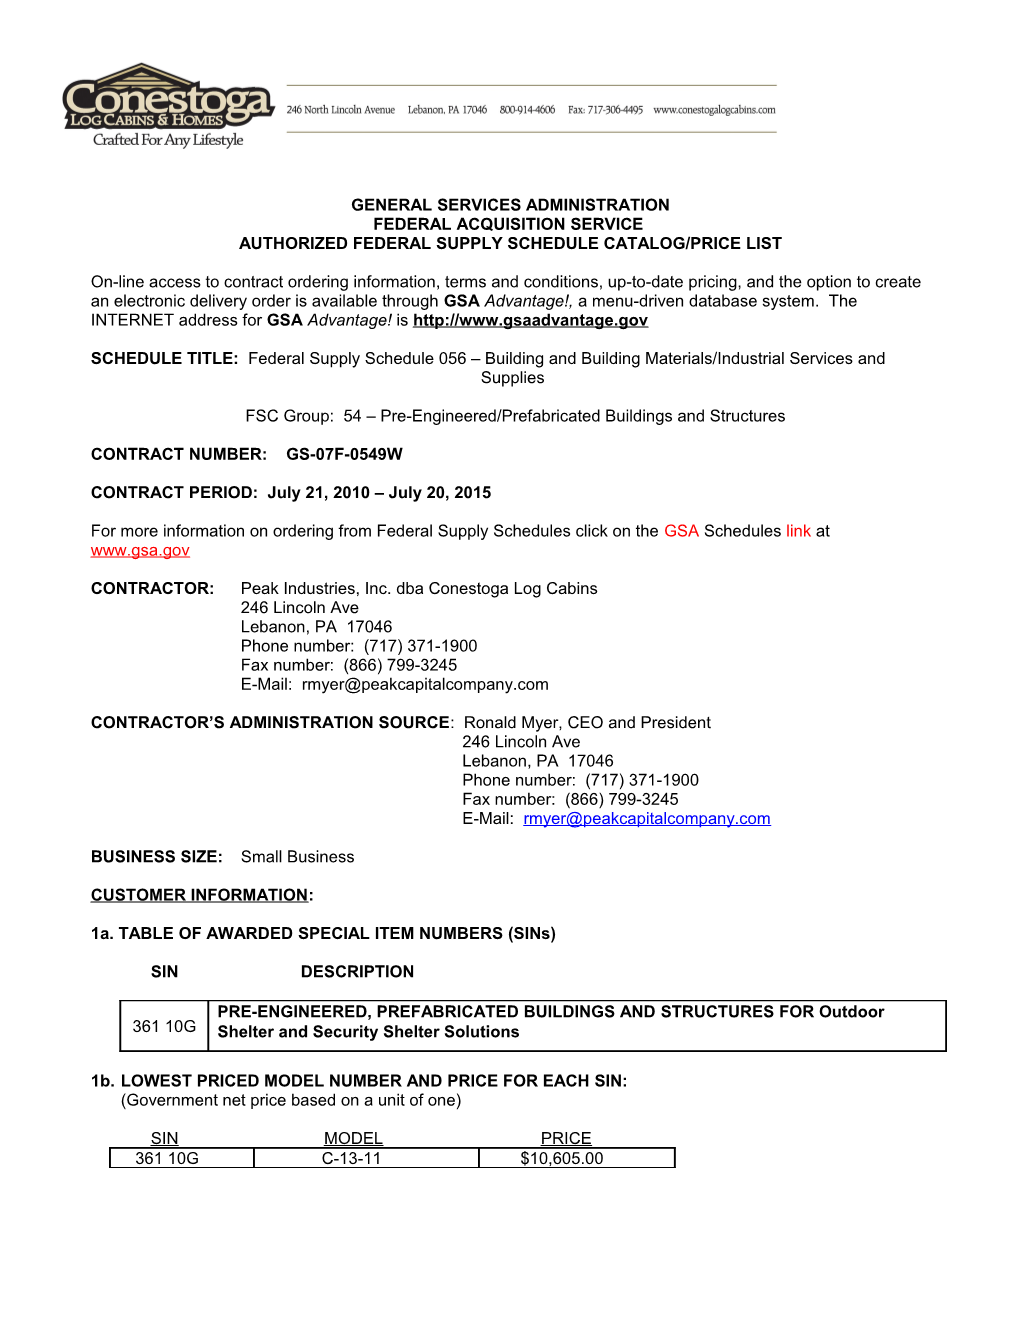 Standard Form 1449, Contract for Commercial Items (Cont D) Page 1A s1